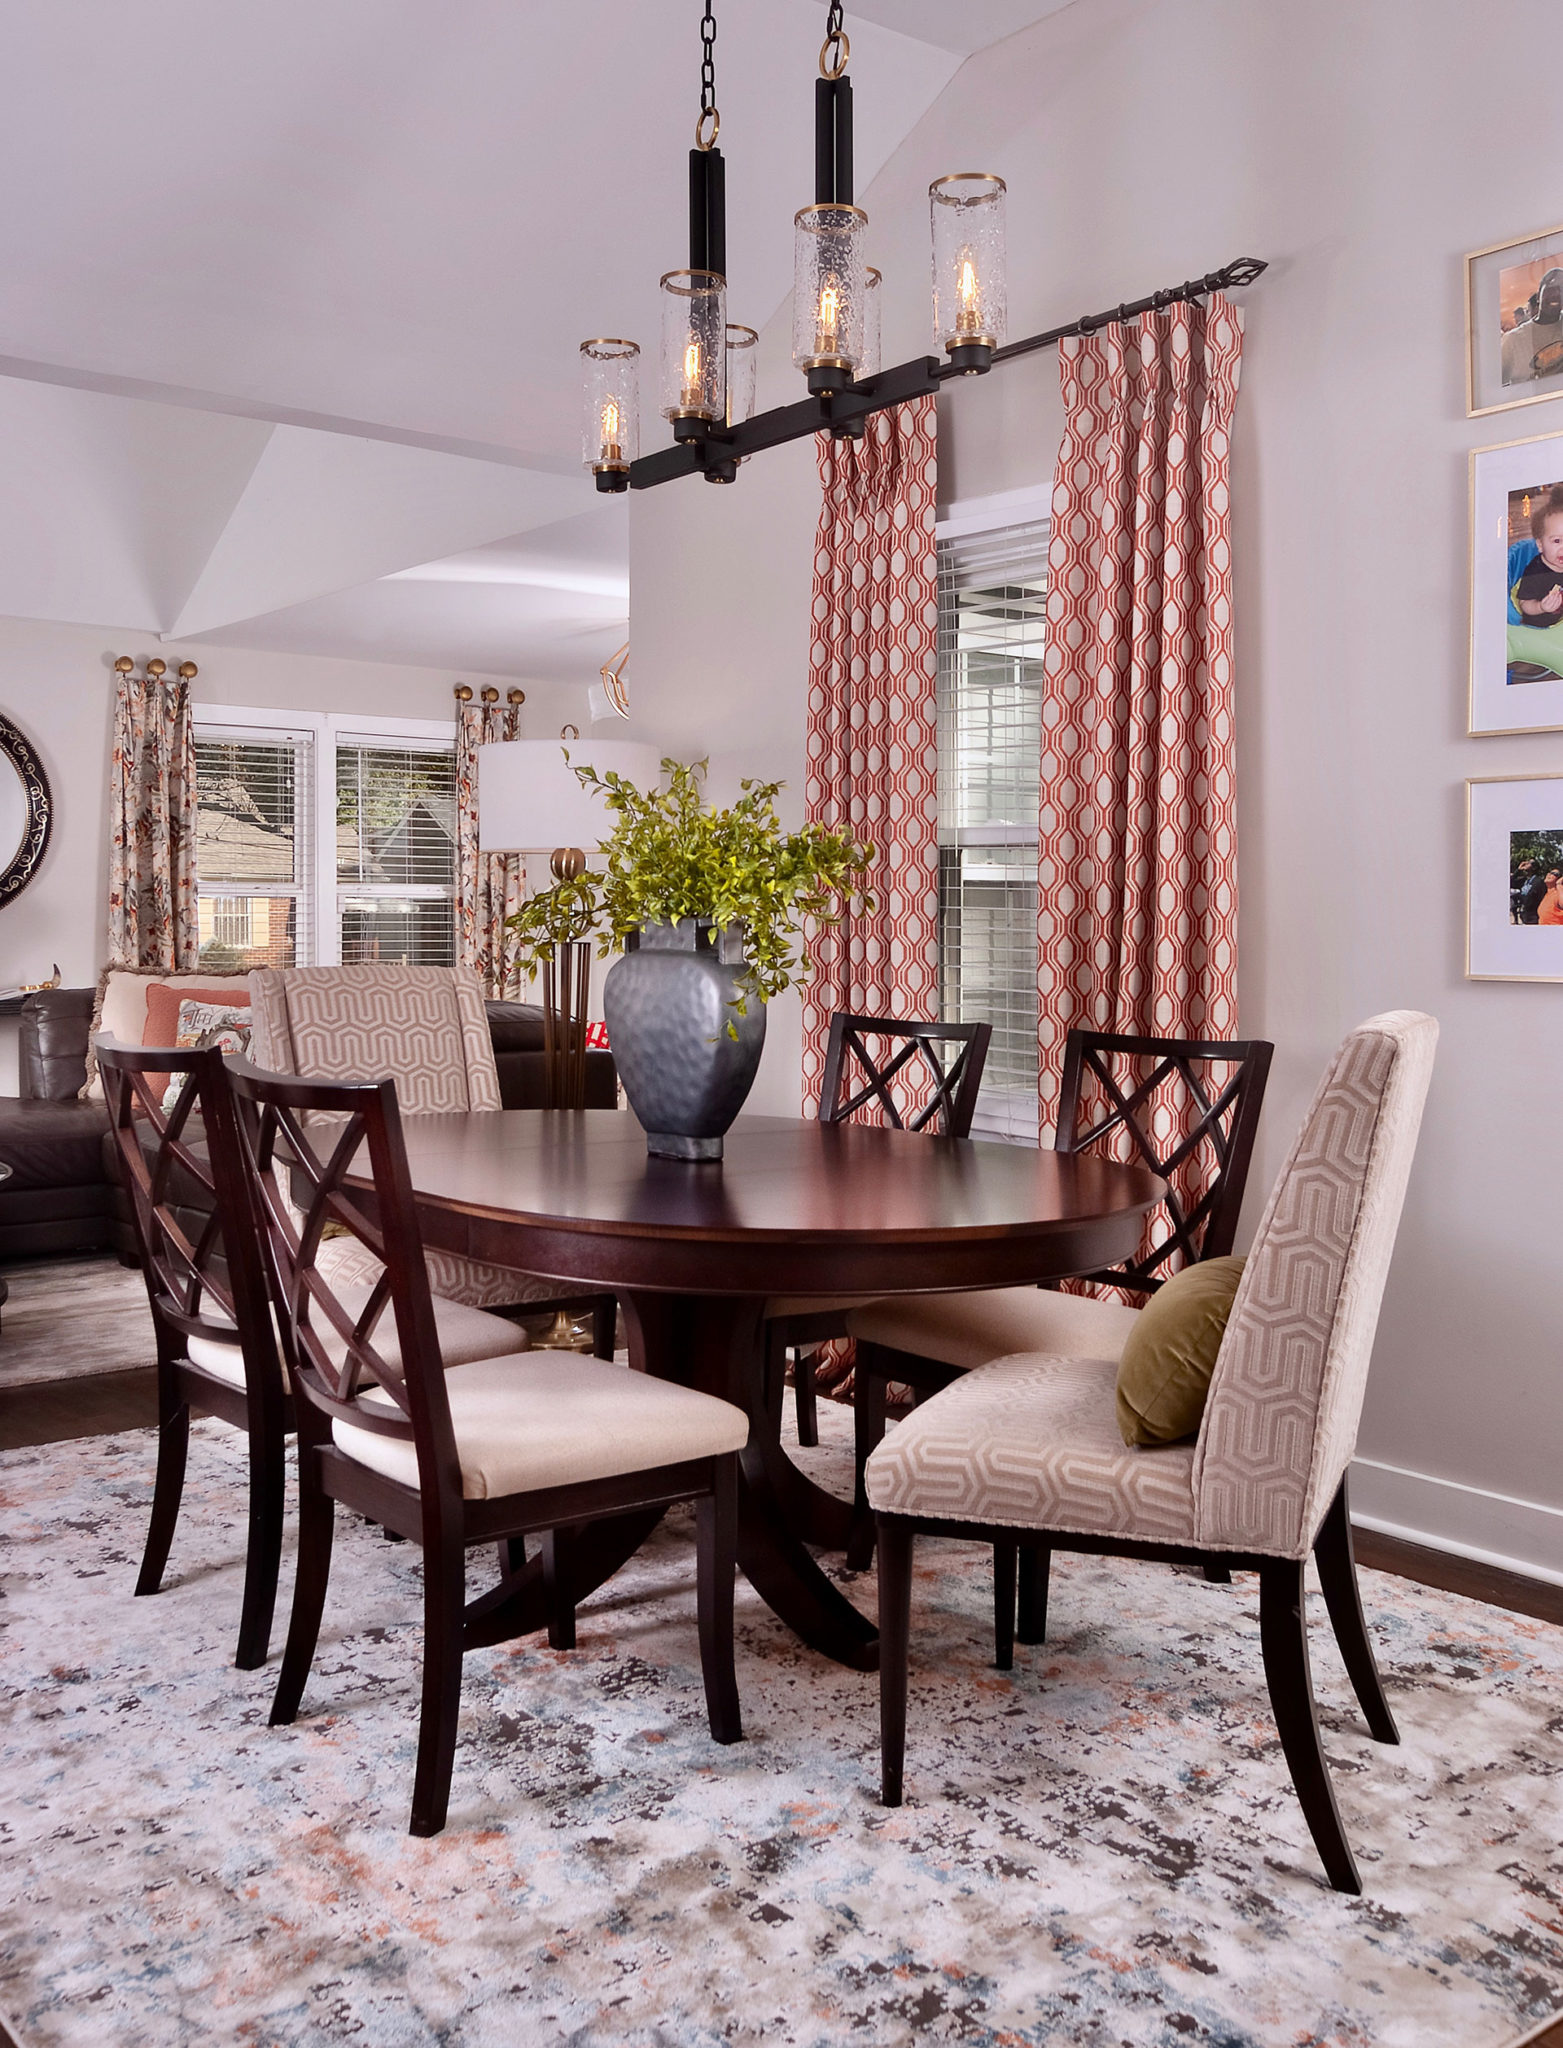 dining space with colorful window treatments